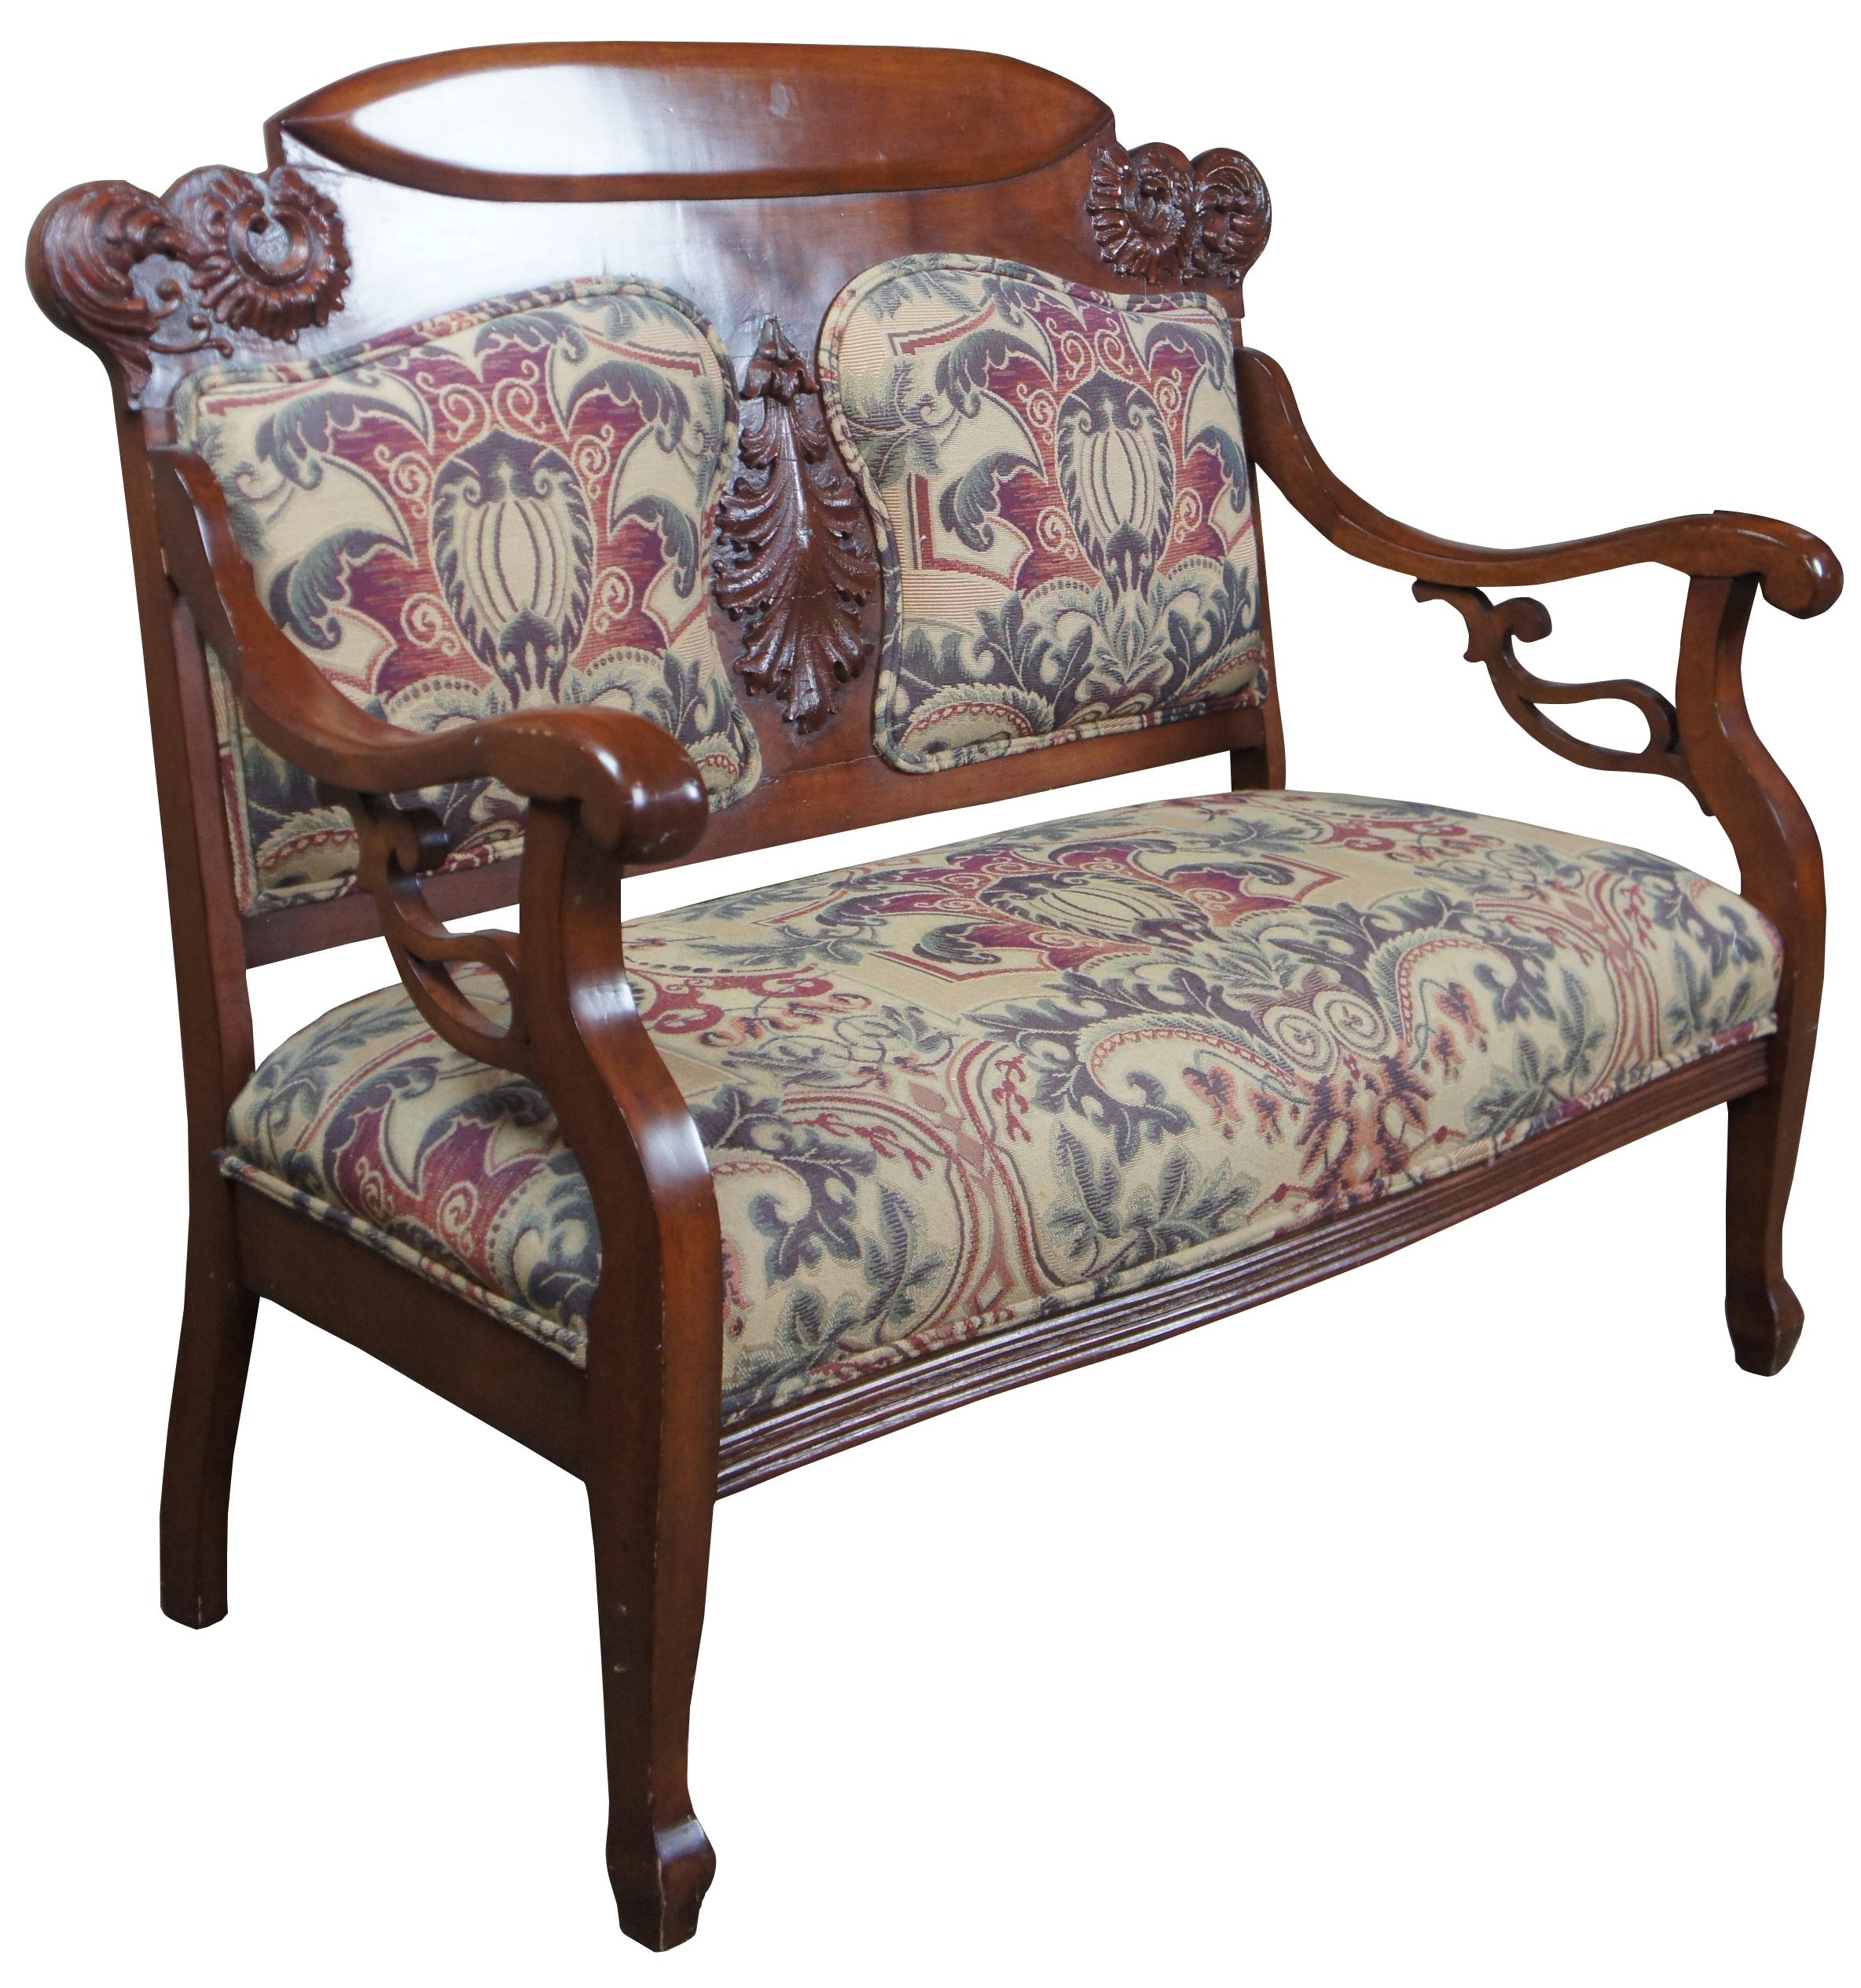 Mid-late 19th century Victorian settee. Made from mahogany with ornate carved back. Featuring split back upholstered panel and seat. Measure: 50